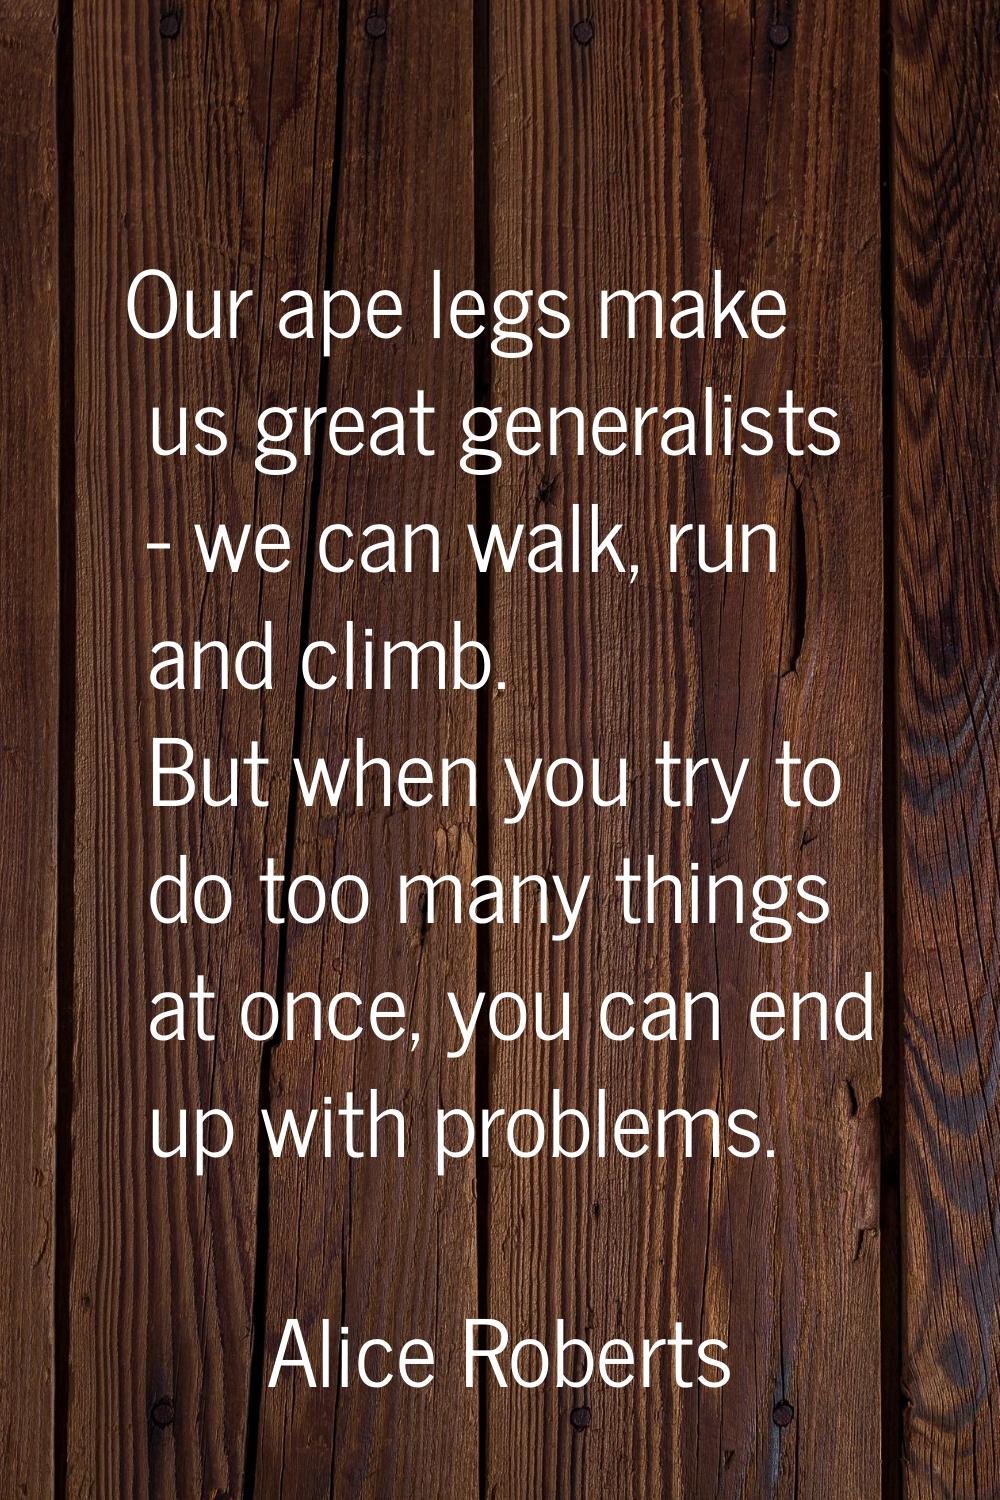 Our ape legs make us great generalists - we can walk, run and climb. But when you try to do too man